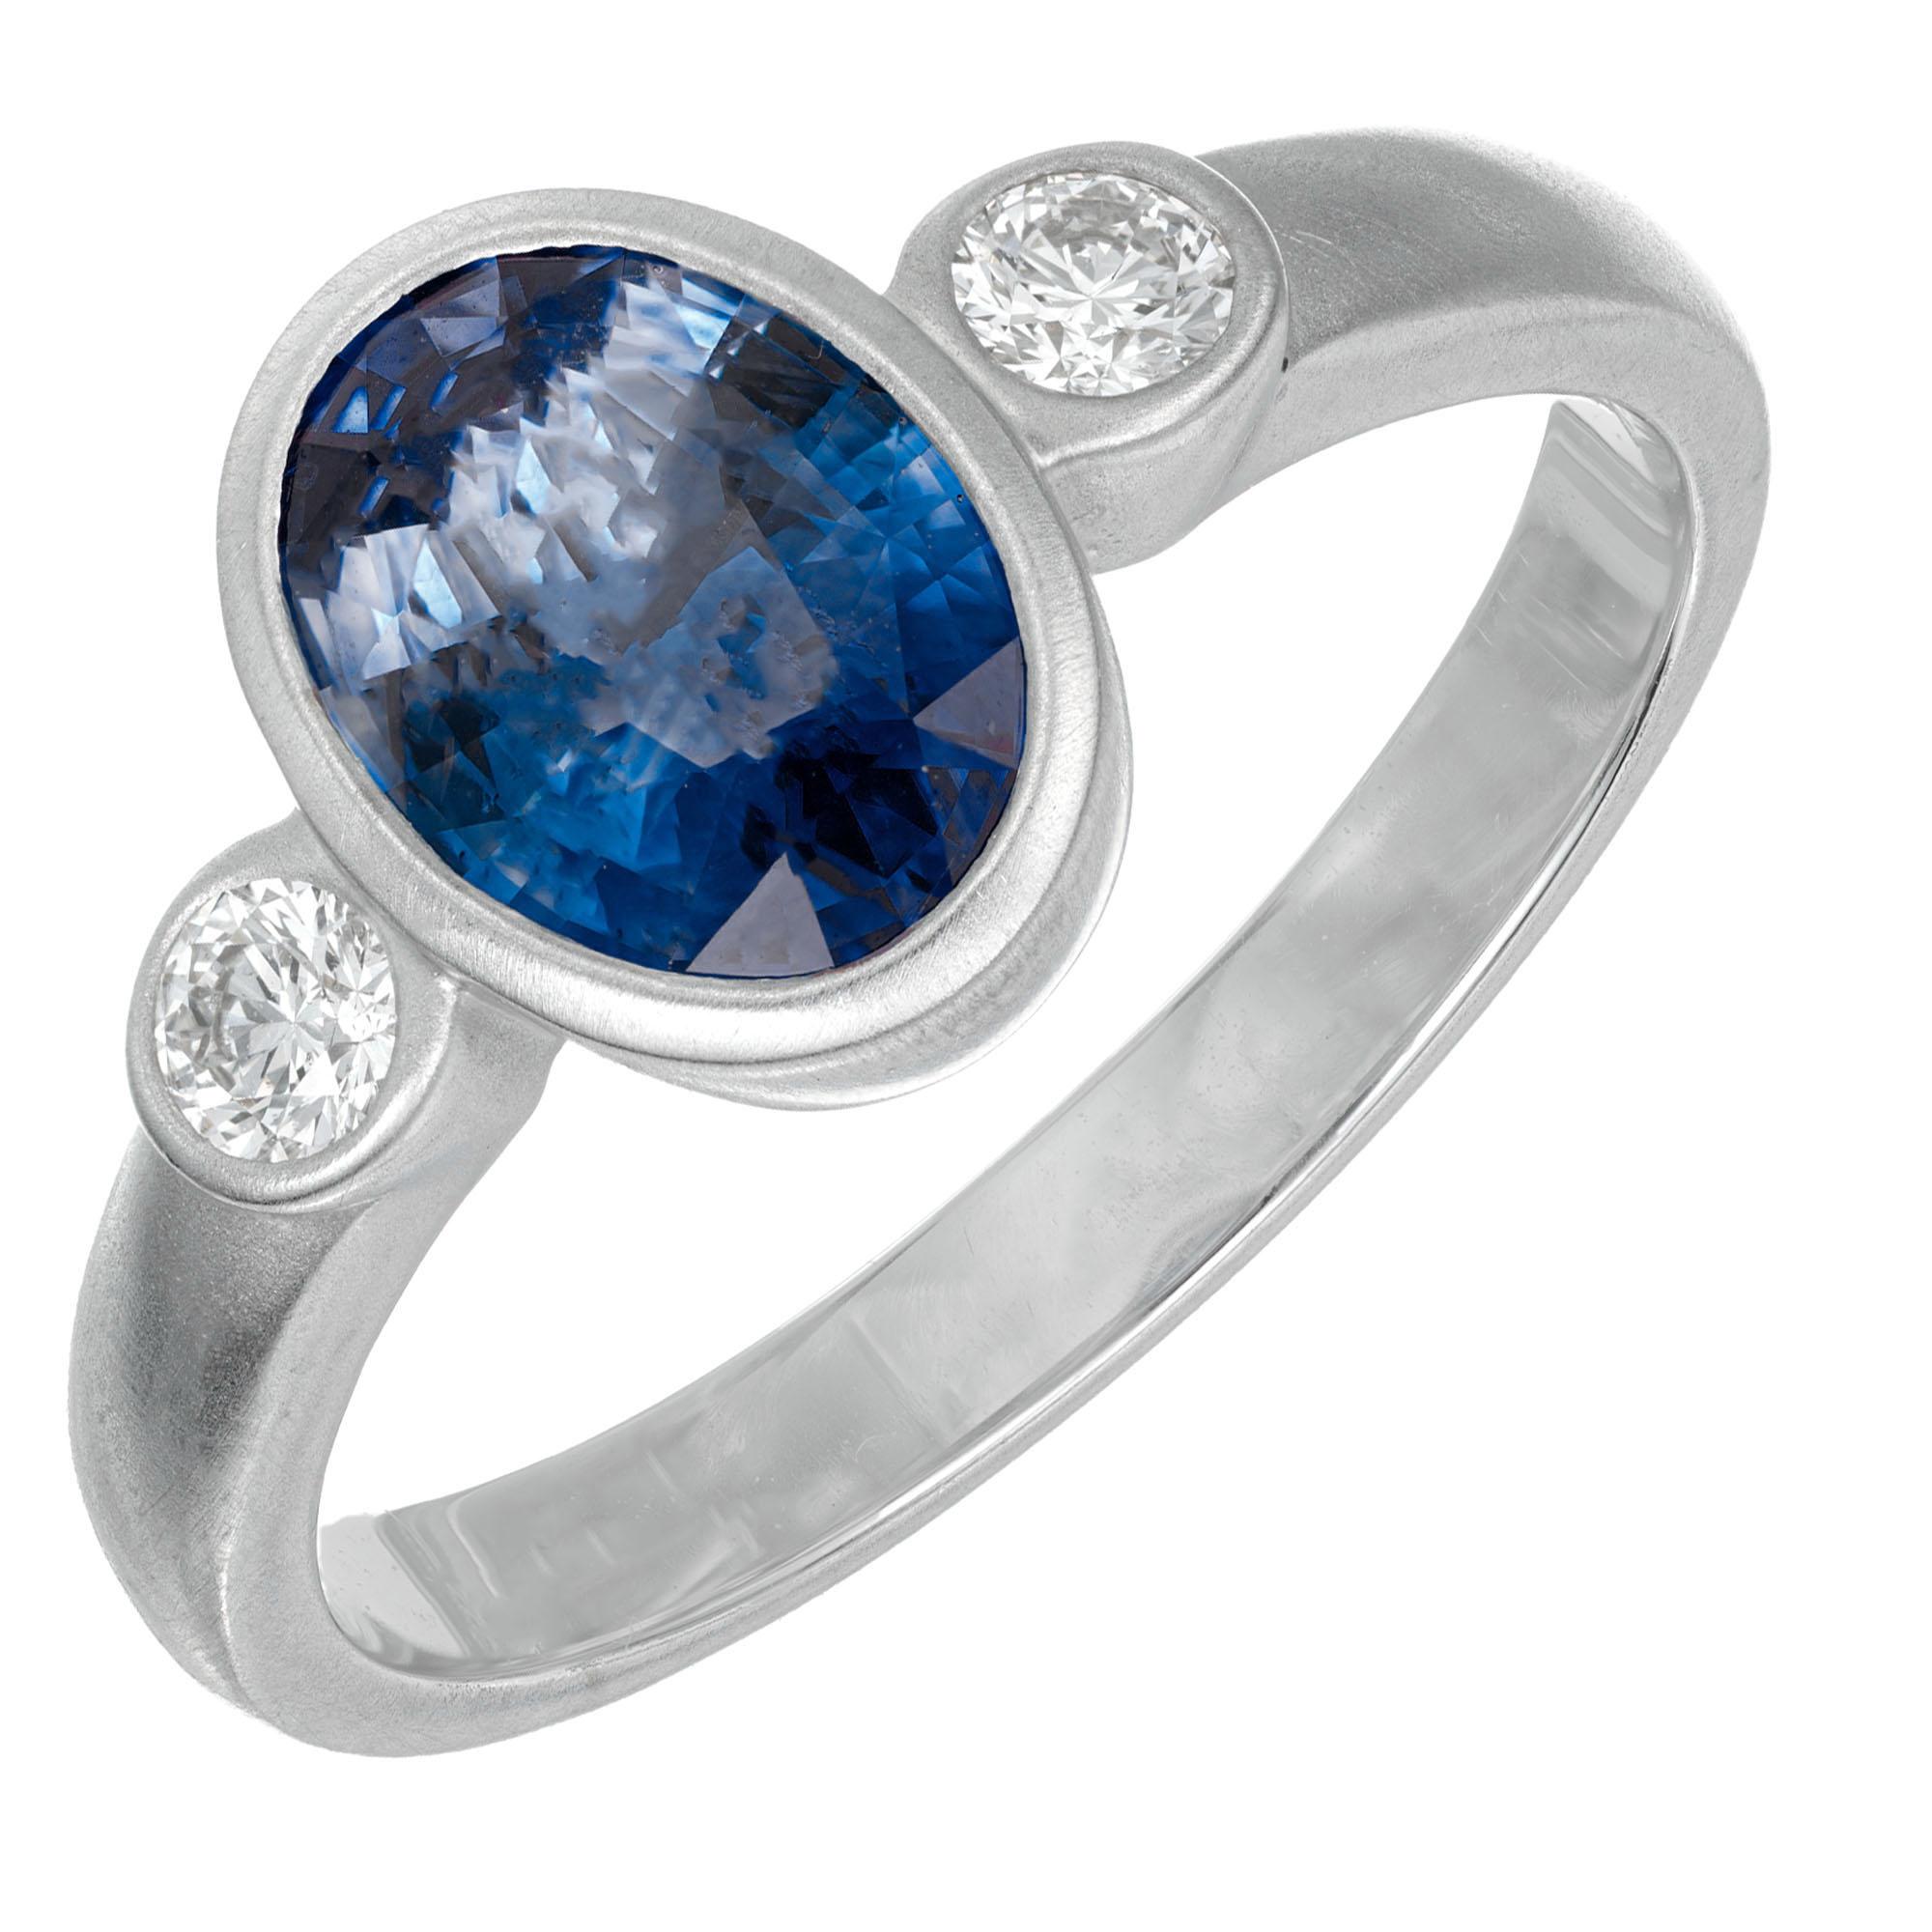 Sapphire and diamond three stone engagement ring. GIA certified center oval sapphire in a 14k white brushed gold setting with 2 round accent diamonds. GIA certified natural simple heat only  Ceylon sapphire. Designed and crafted in the Peter Suchy